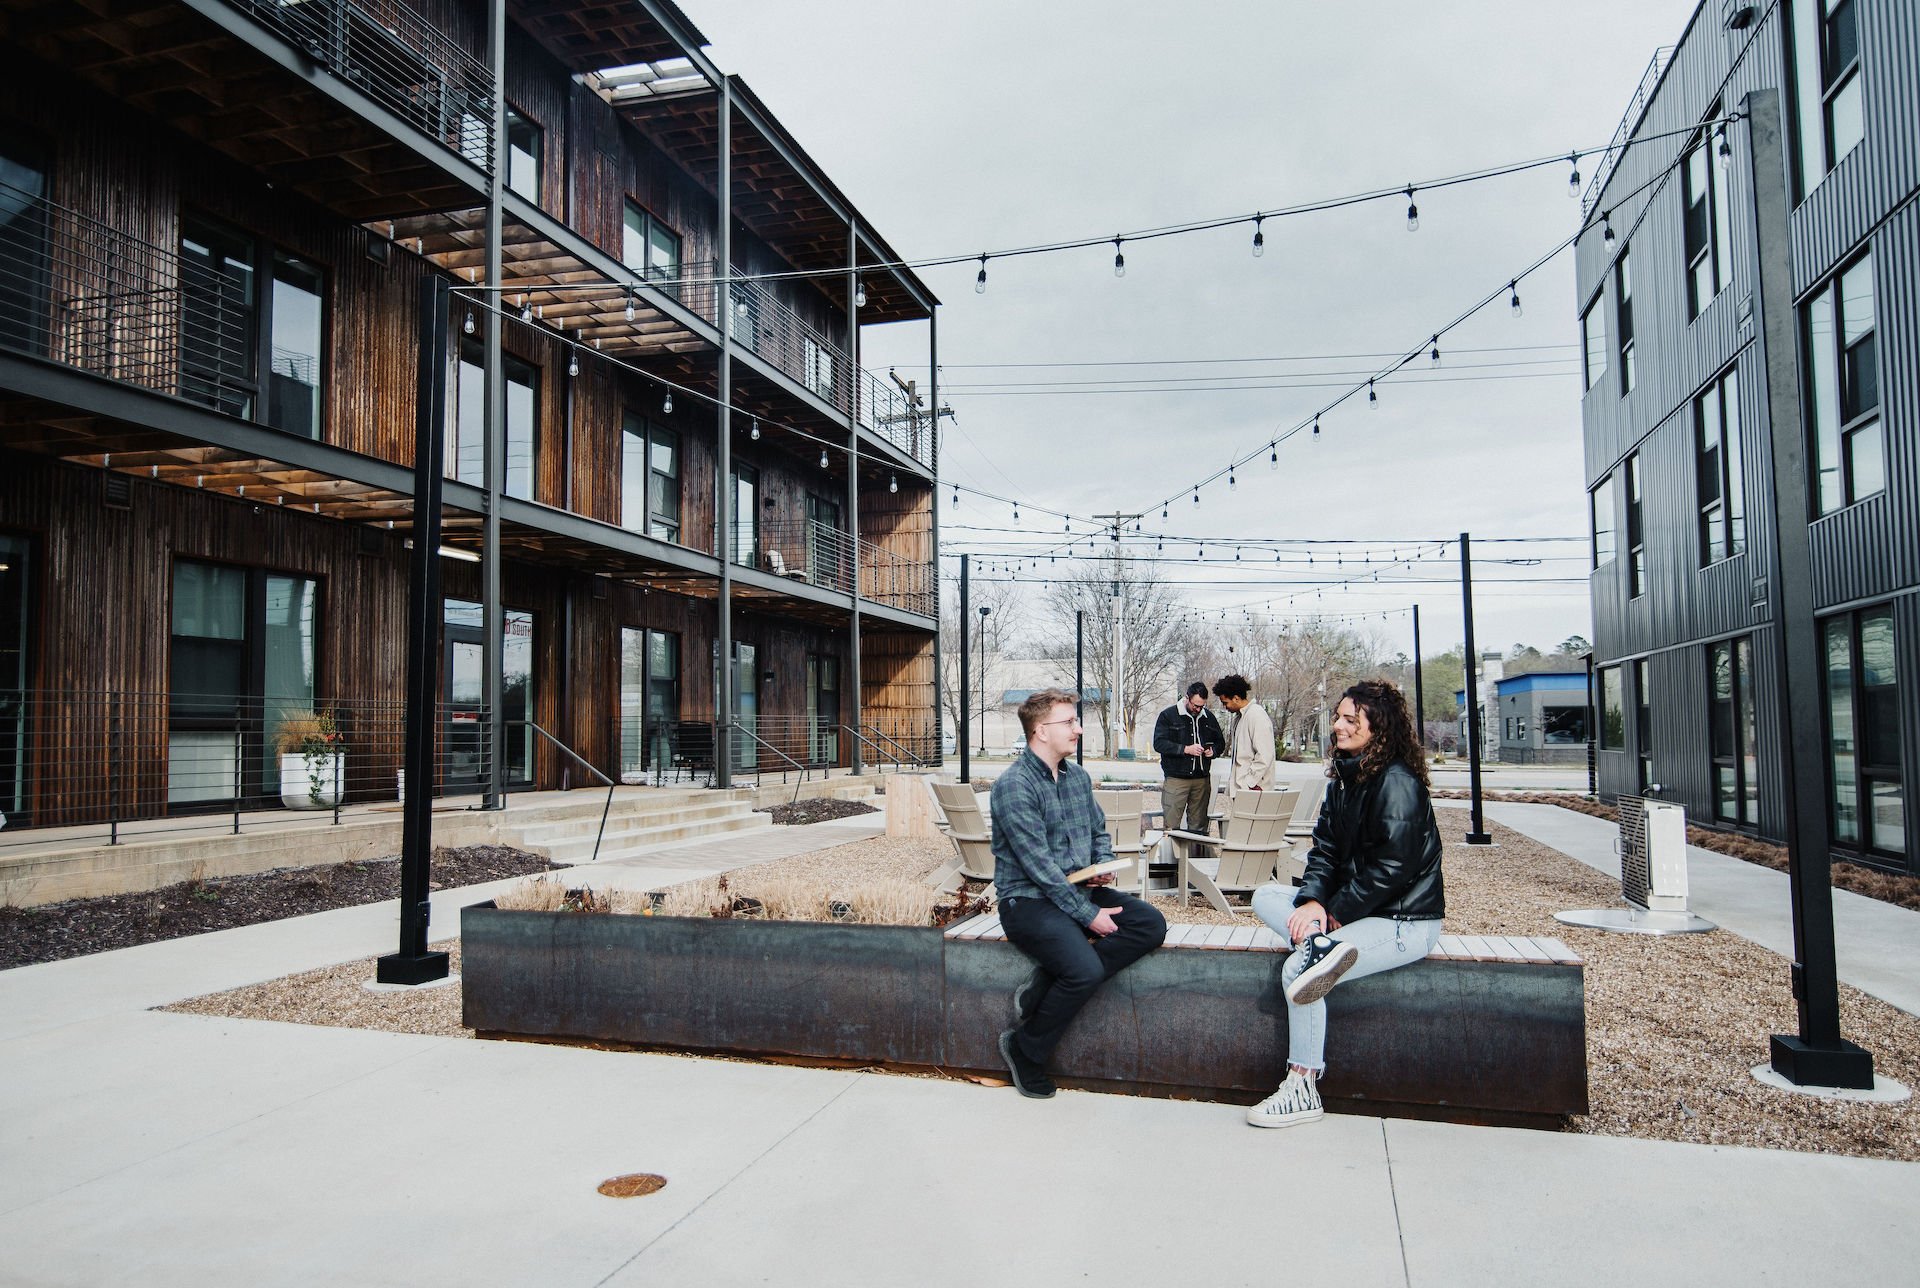  South Yard Lofts (Fayetteville, AR) | Image Courtesy of Specialized Real Estate Group 